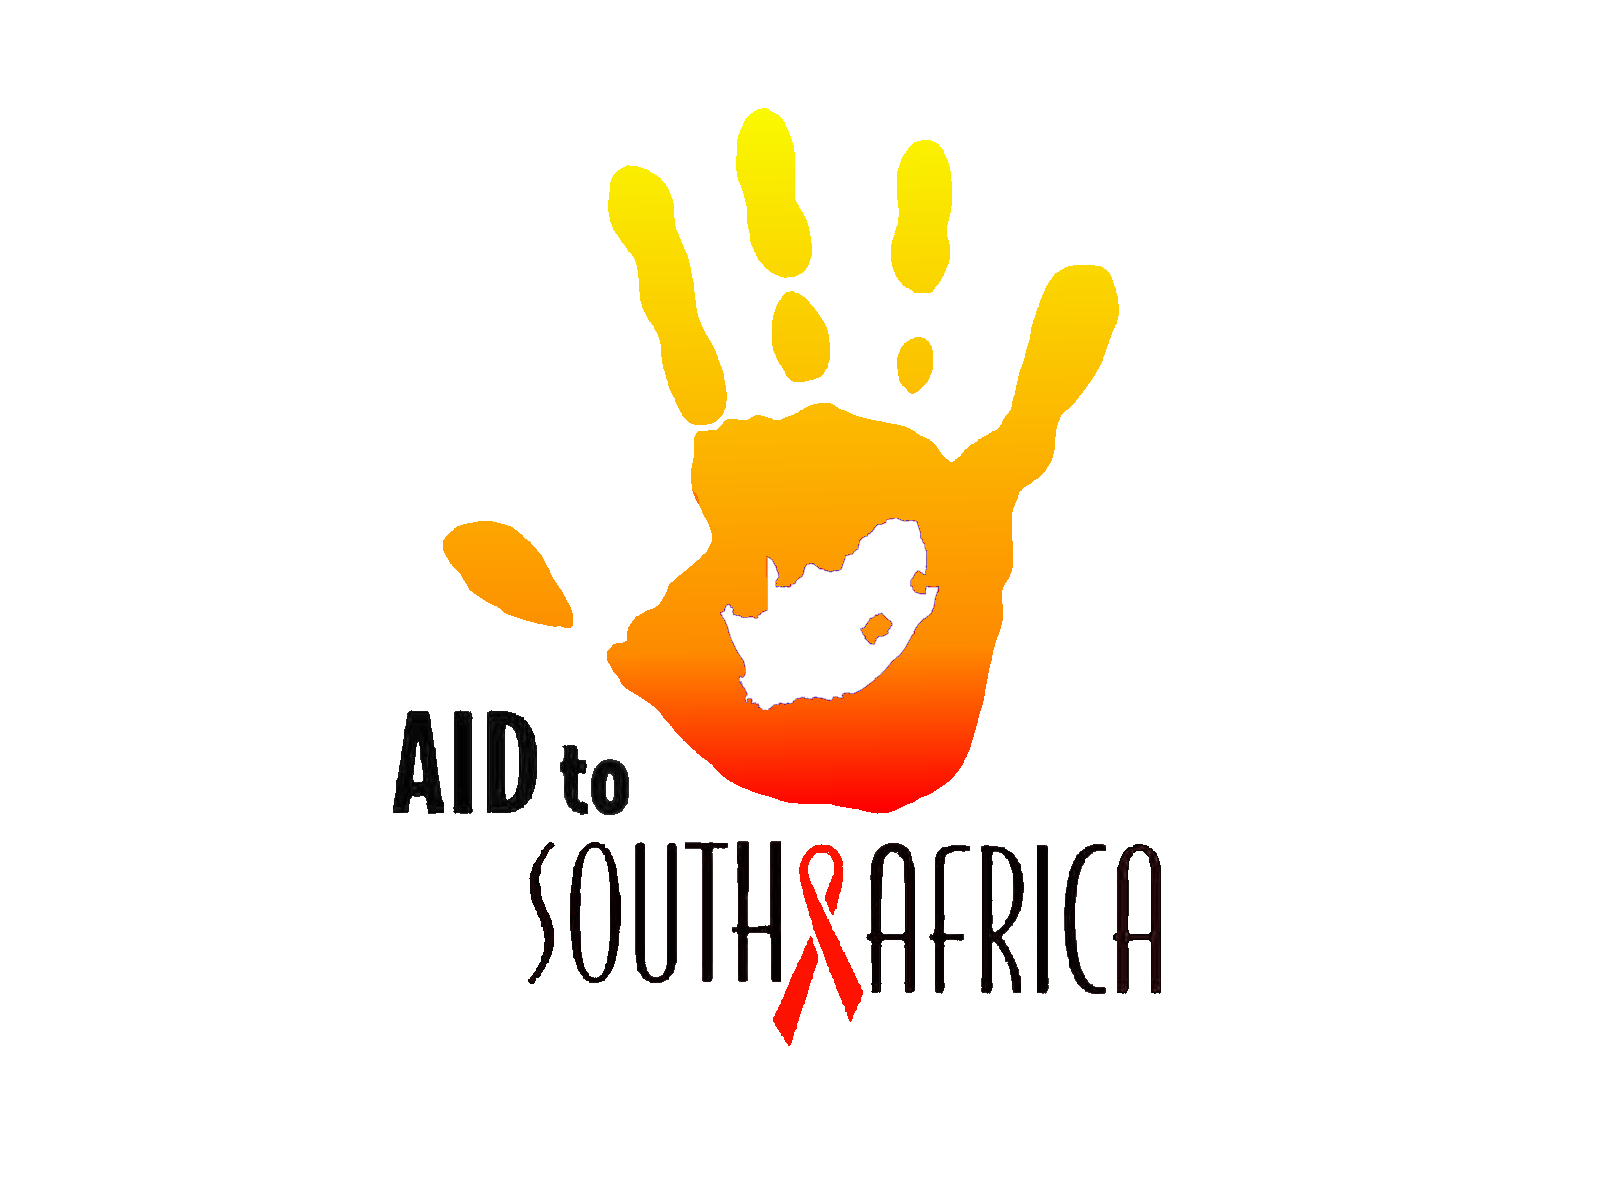 Aid to South Africa Logo